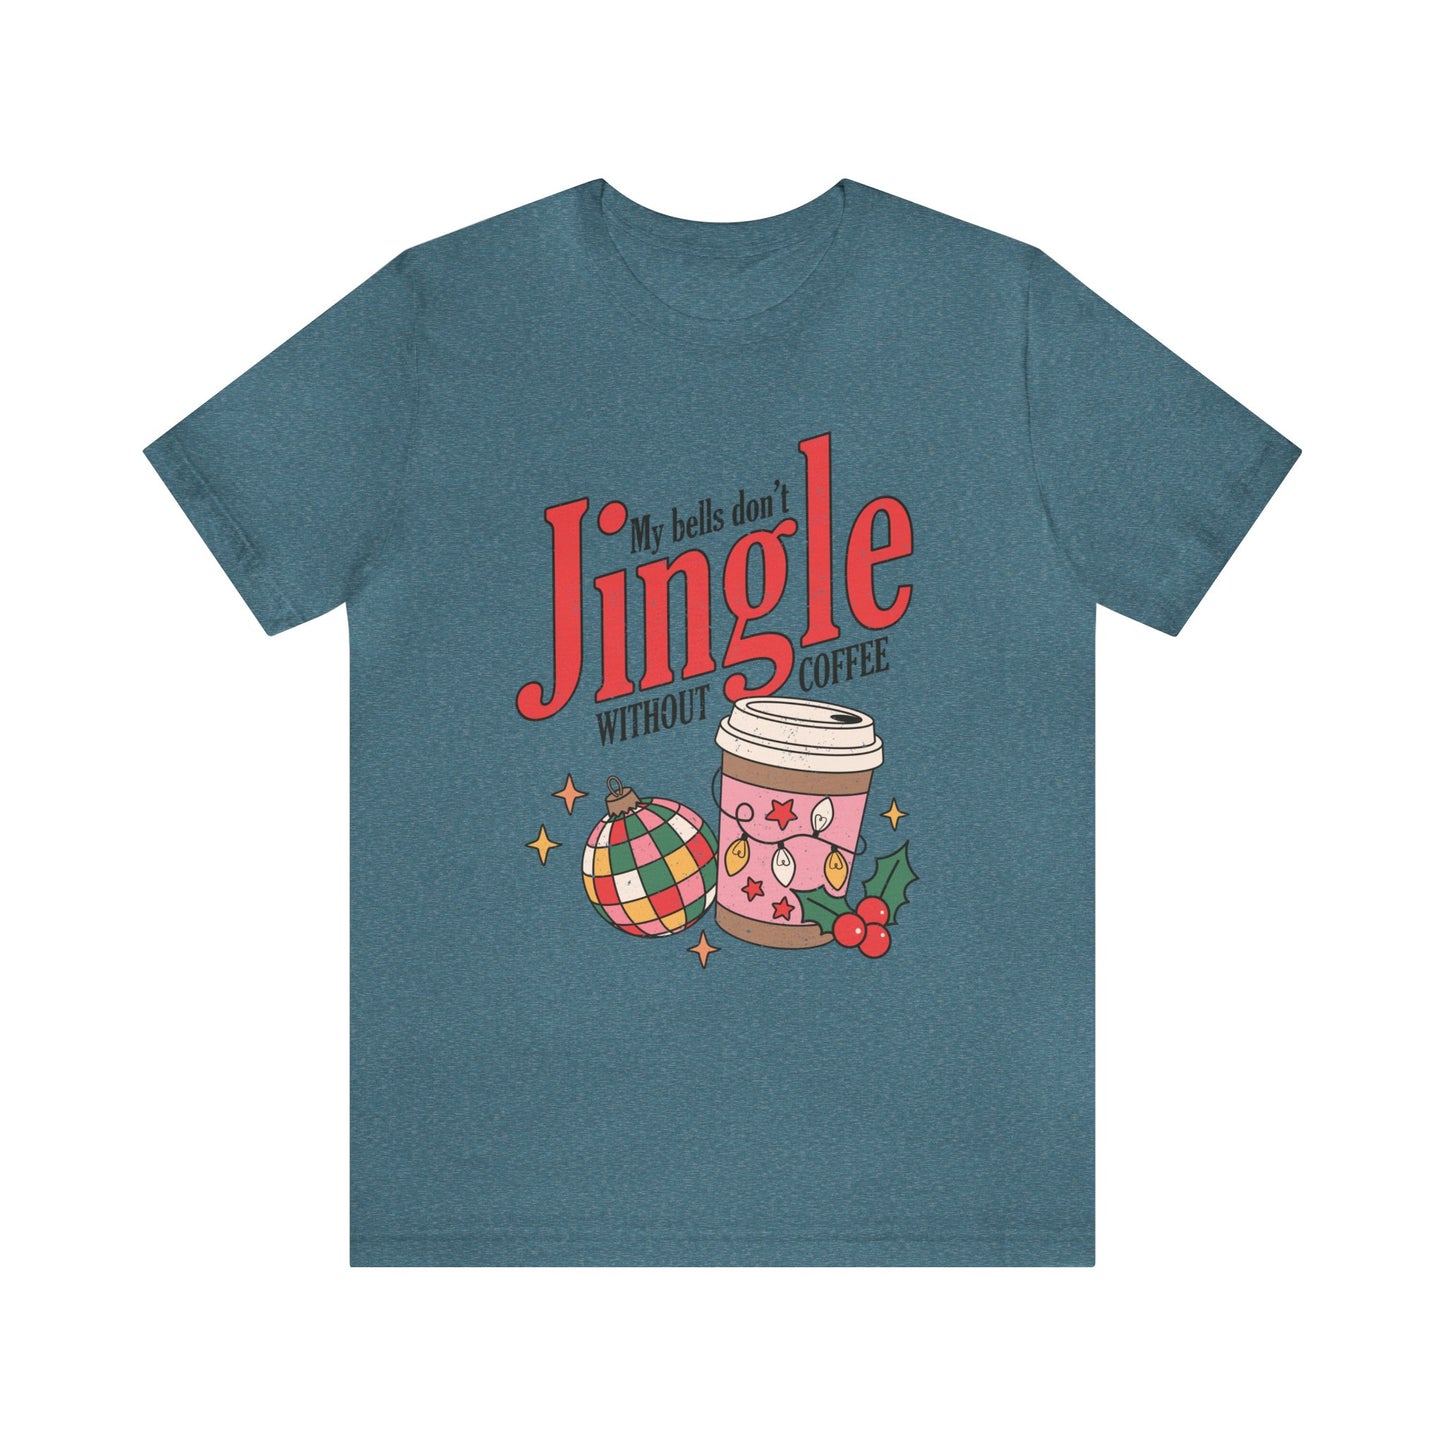 My Bells Don't Jingle Without Coffee Women's Funny Short Sleeve Christmas T Shirt